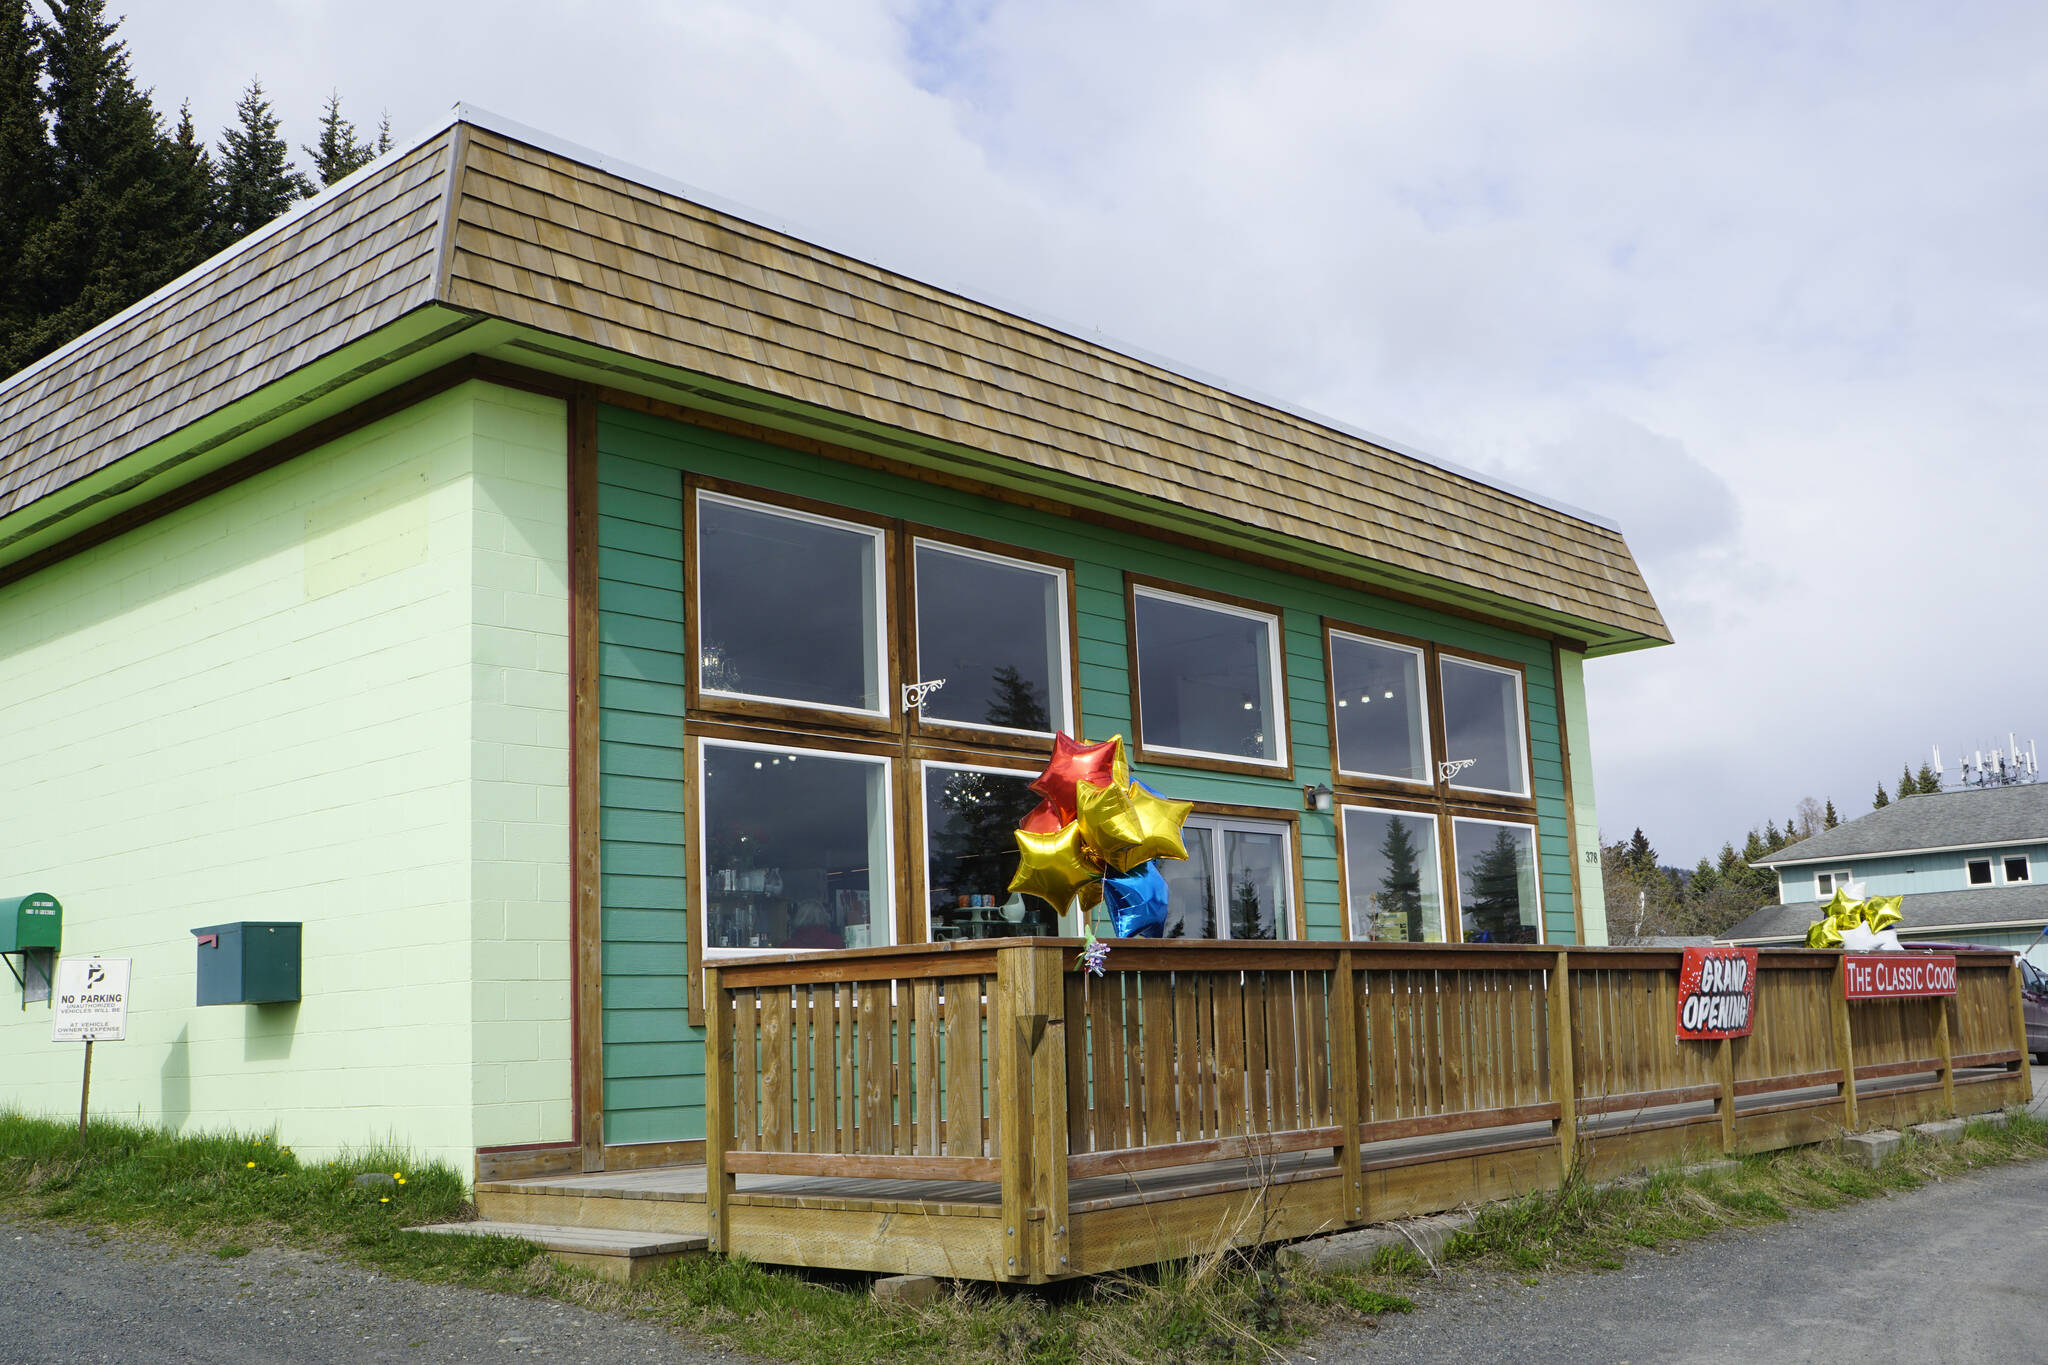 The new location of Classic Cook on Pioneer Avenue in the former Orca Plumbing and K-Bay Caffe building on May 5, 2022, in Homer, Alaska. (Photo by Michael Armstrong/Homer News)